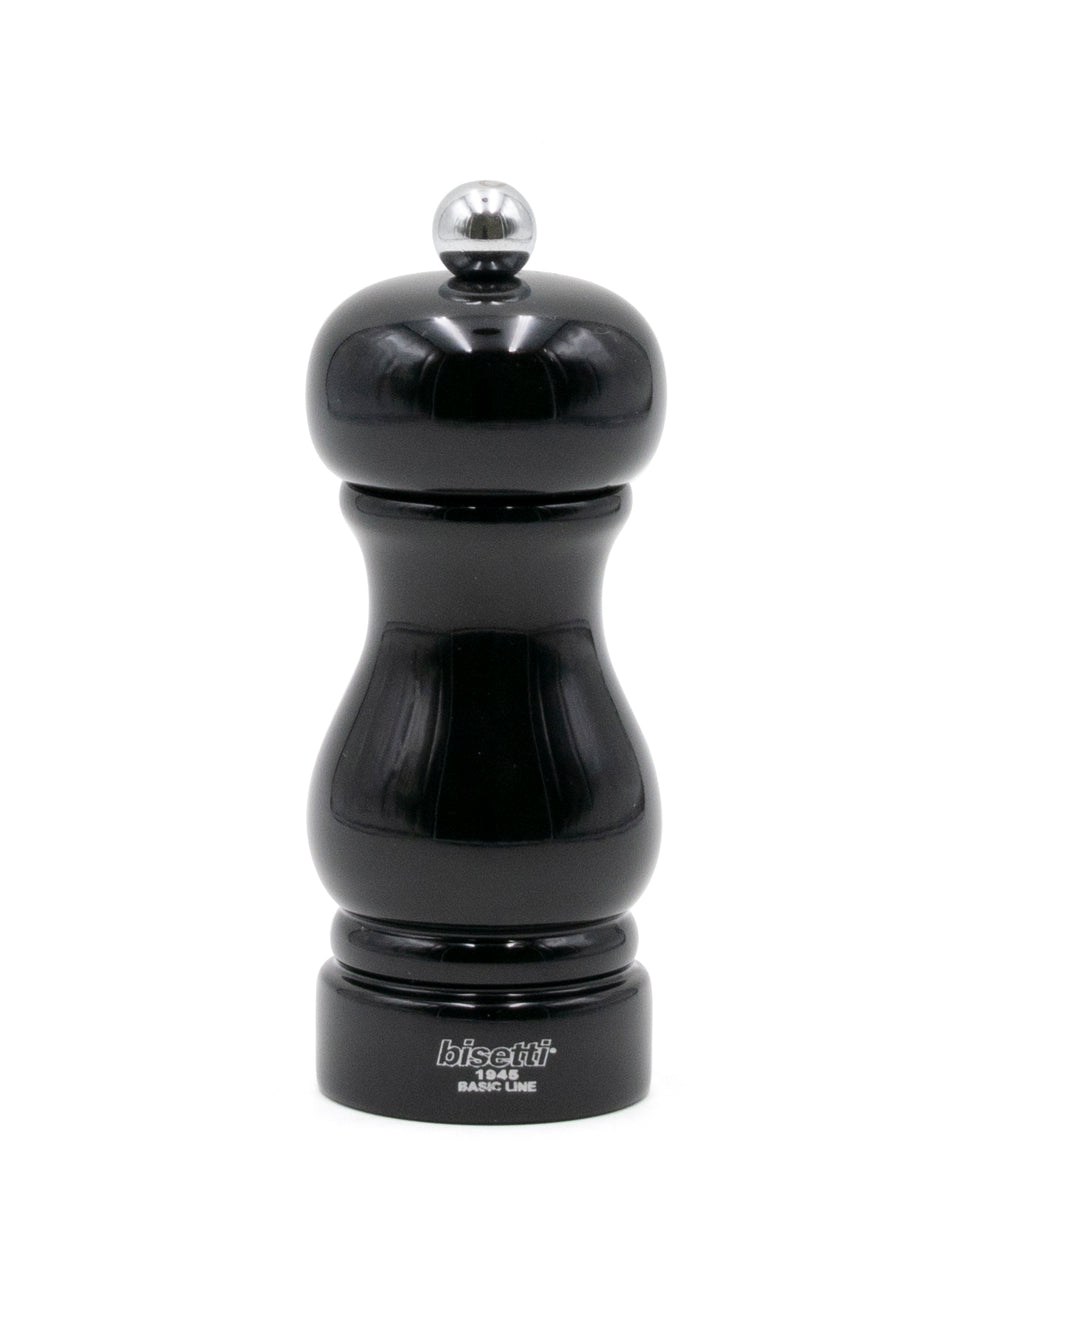 Bisetti Beech Wood Salt And Pepper Mill -  Black Lacquered